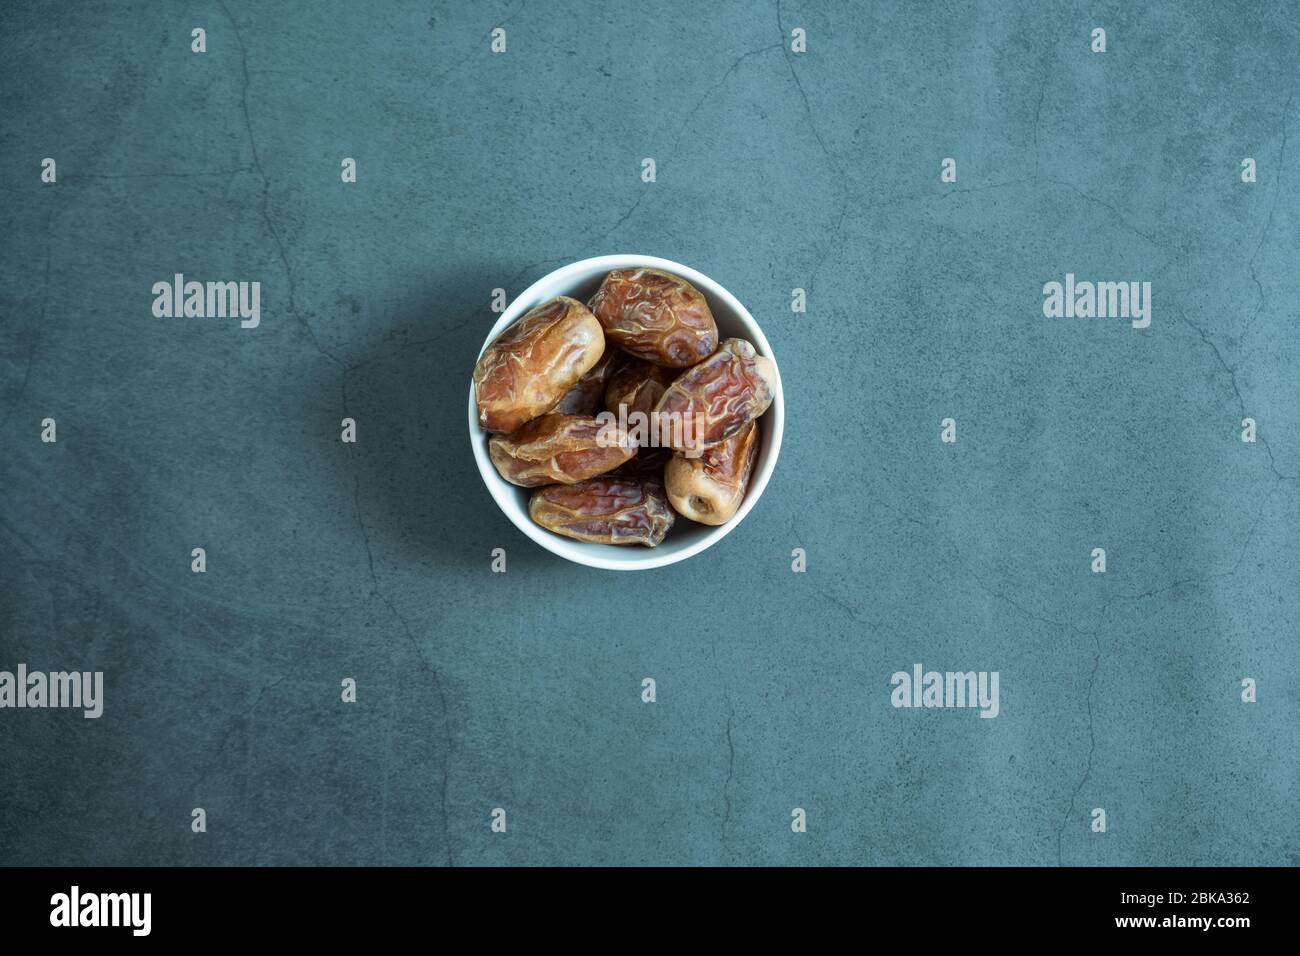 Raw date fruit ready to eat in porcelain bowl on concrete background. Traditional, delicious and healthy ramadan food. Top view, flat lay. Stock Photo